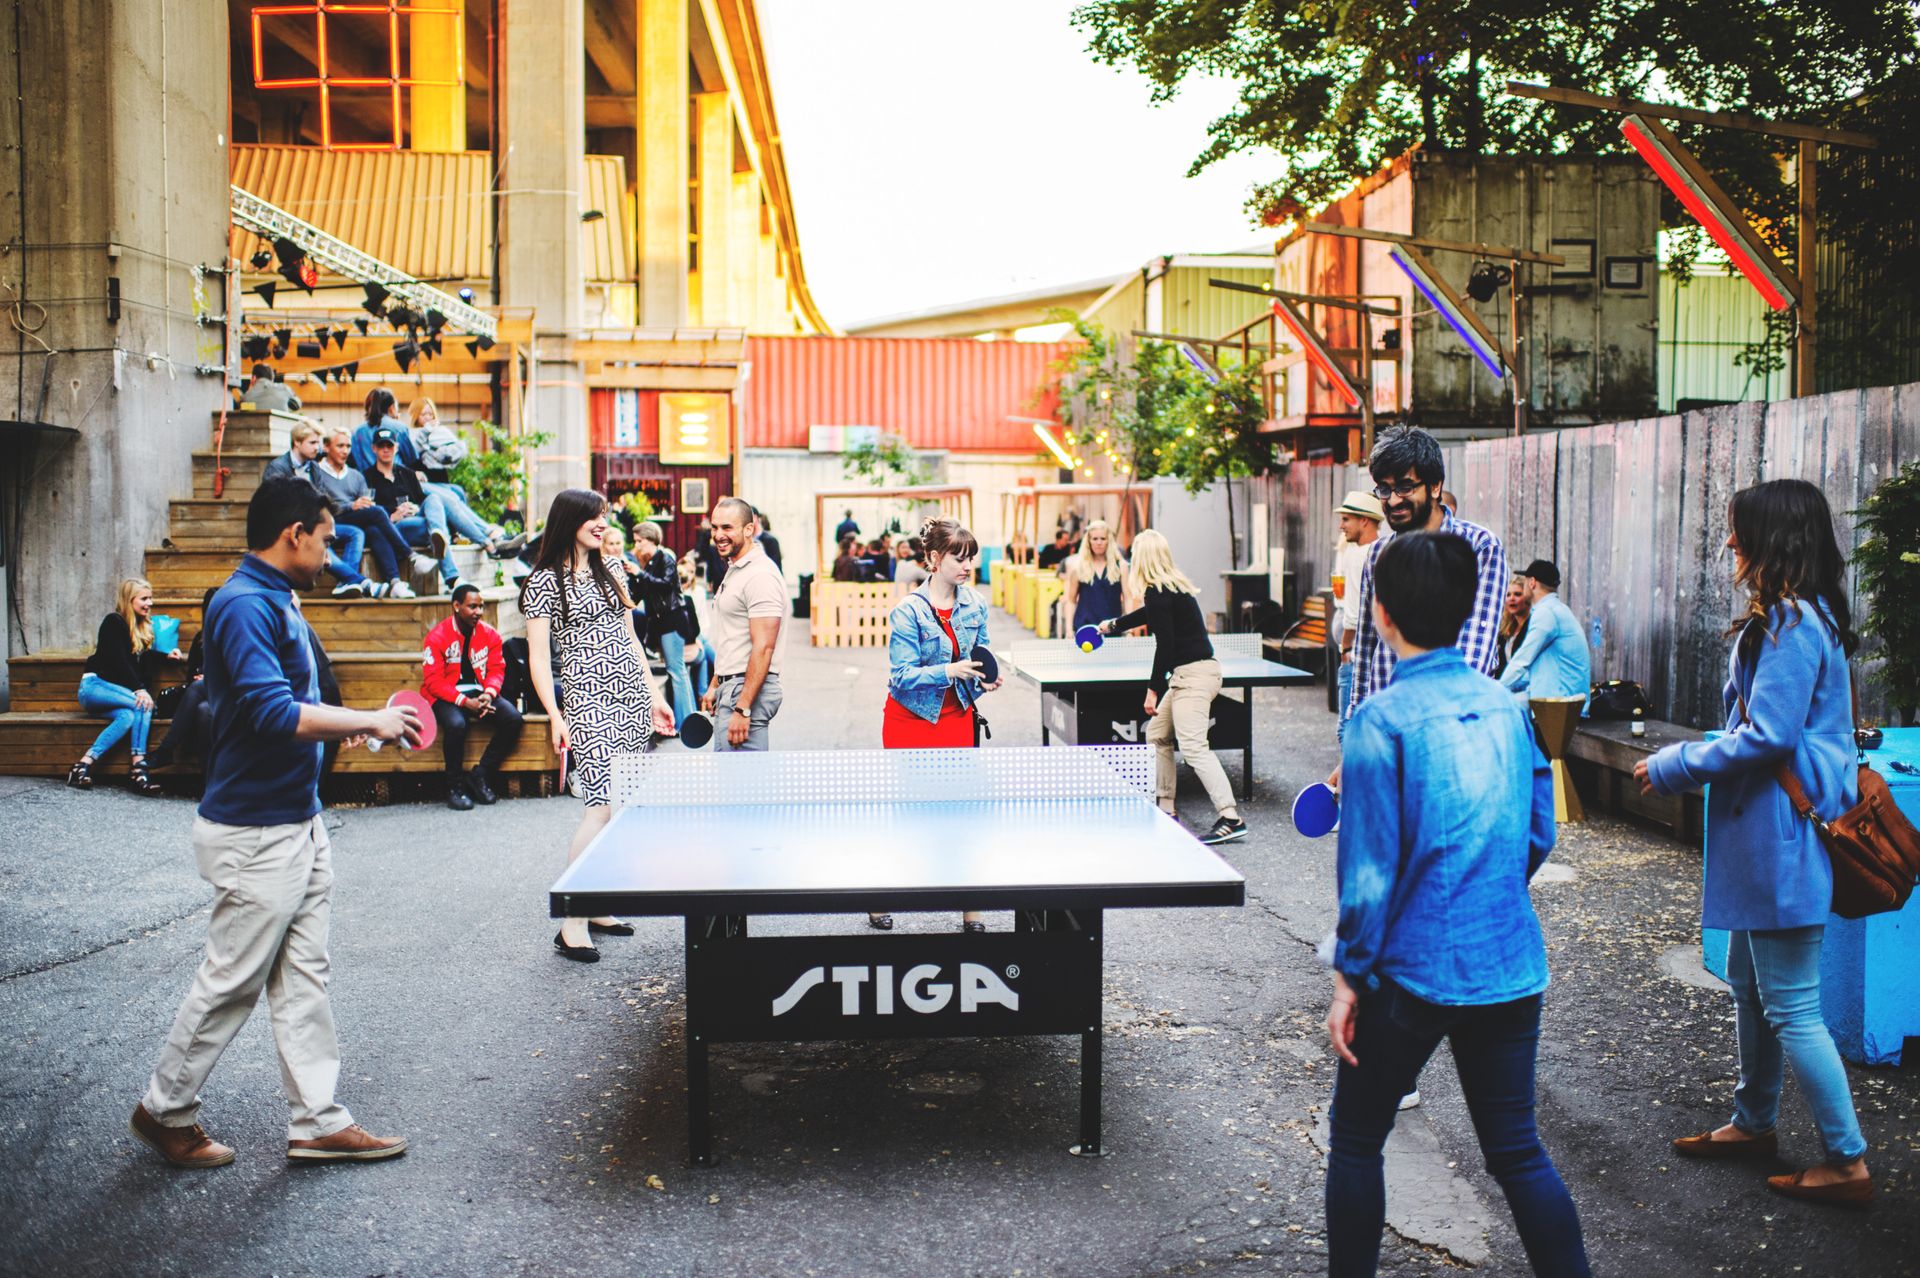 People playing table tennis outside.